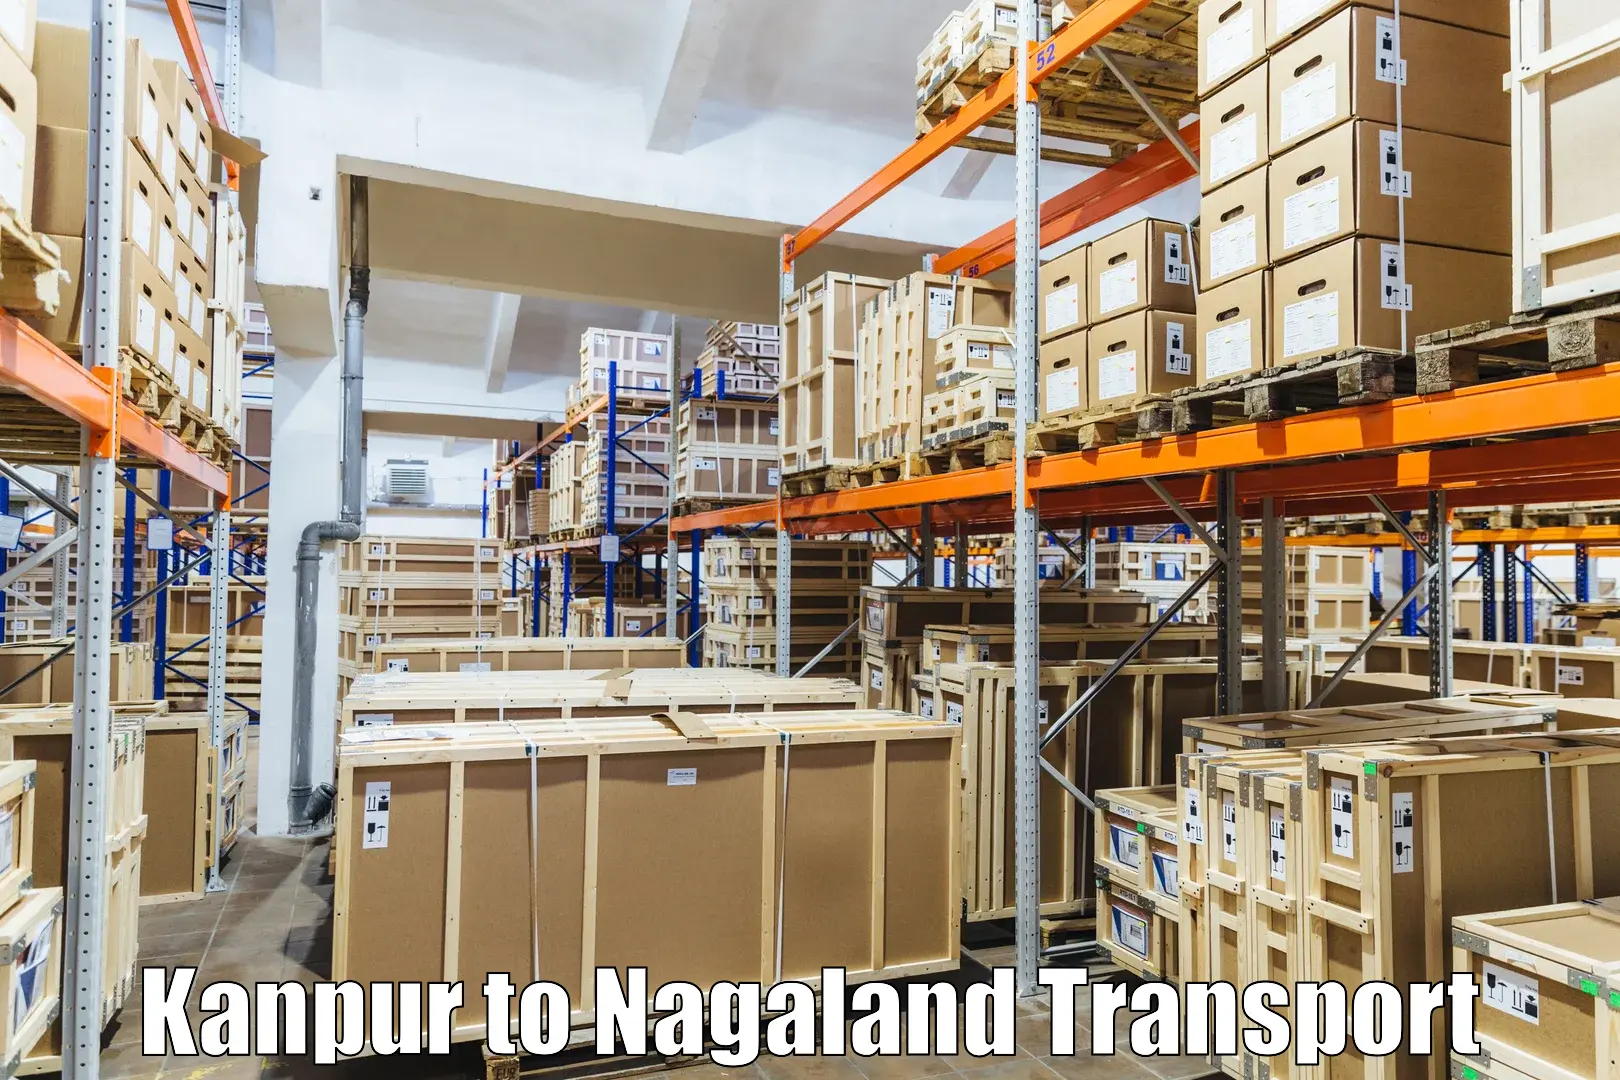 Commercial transport service Kanpur to Dimapur